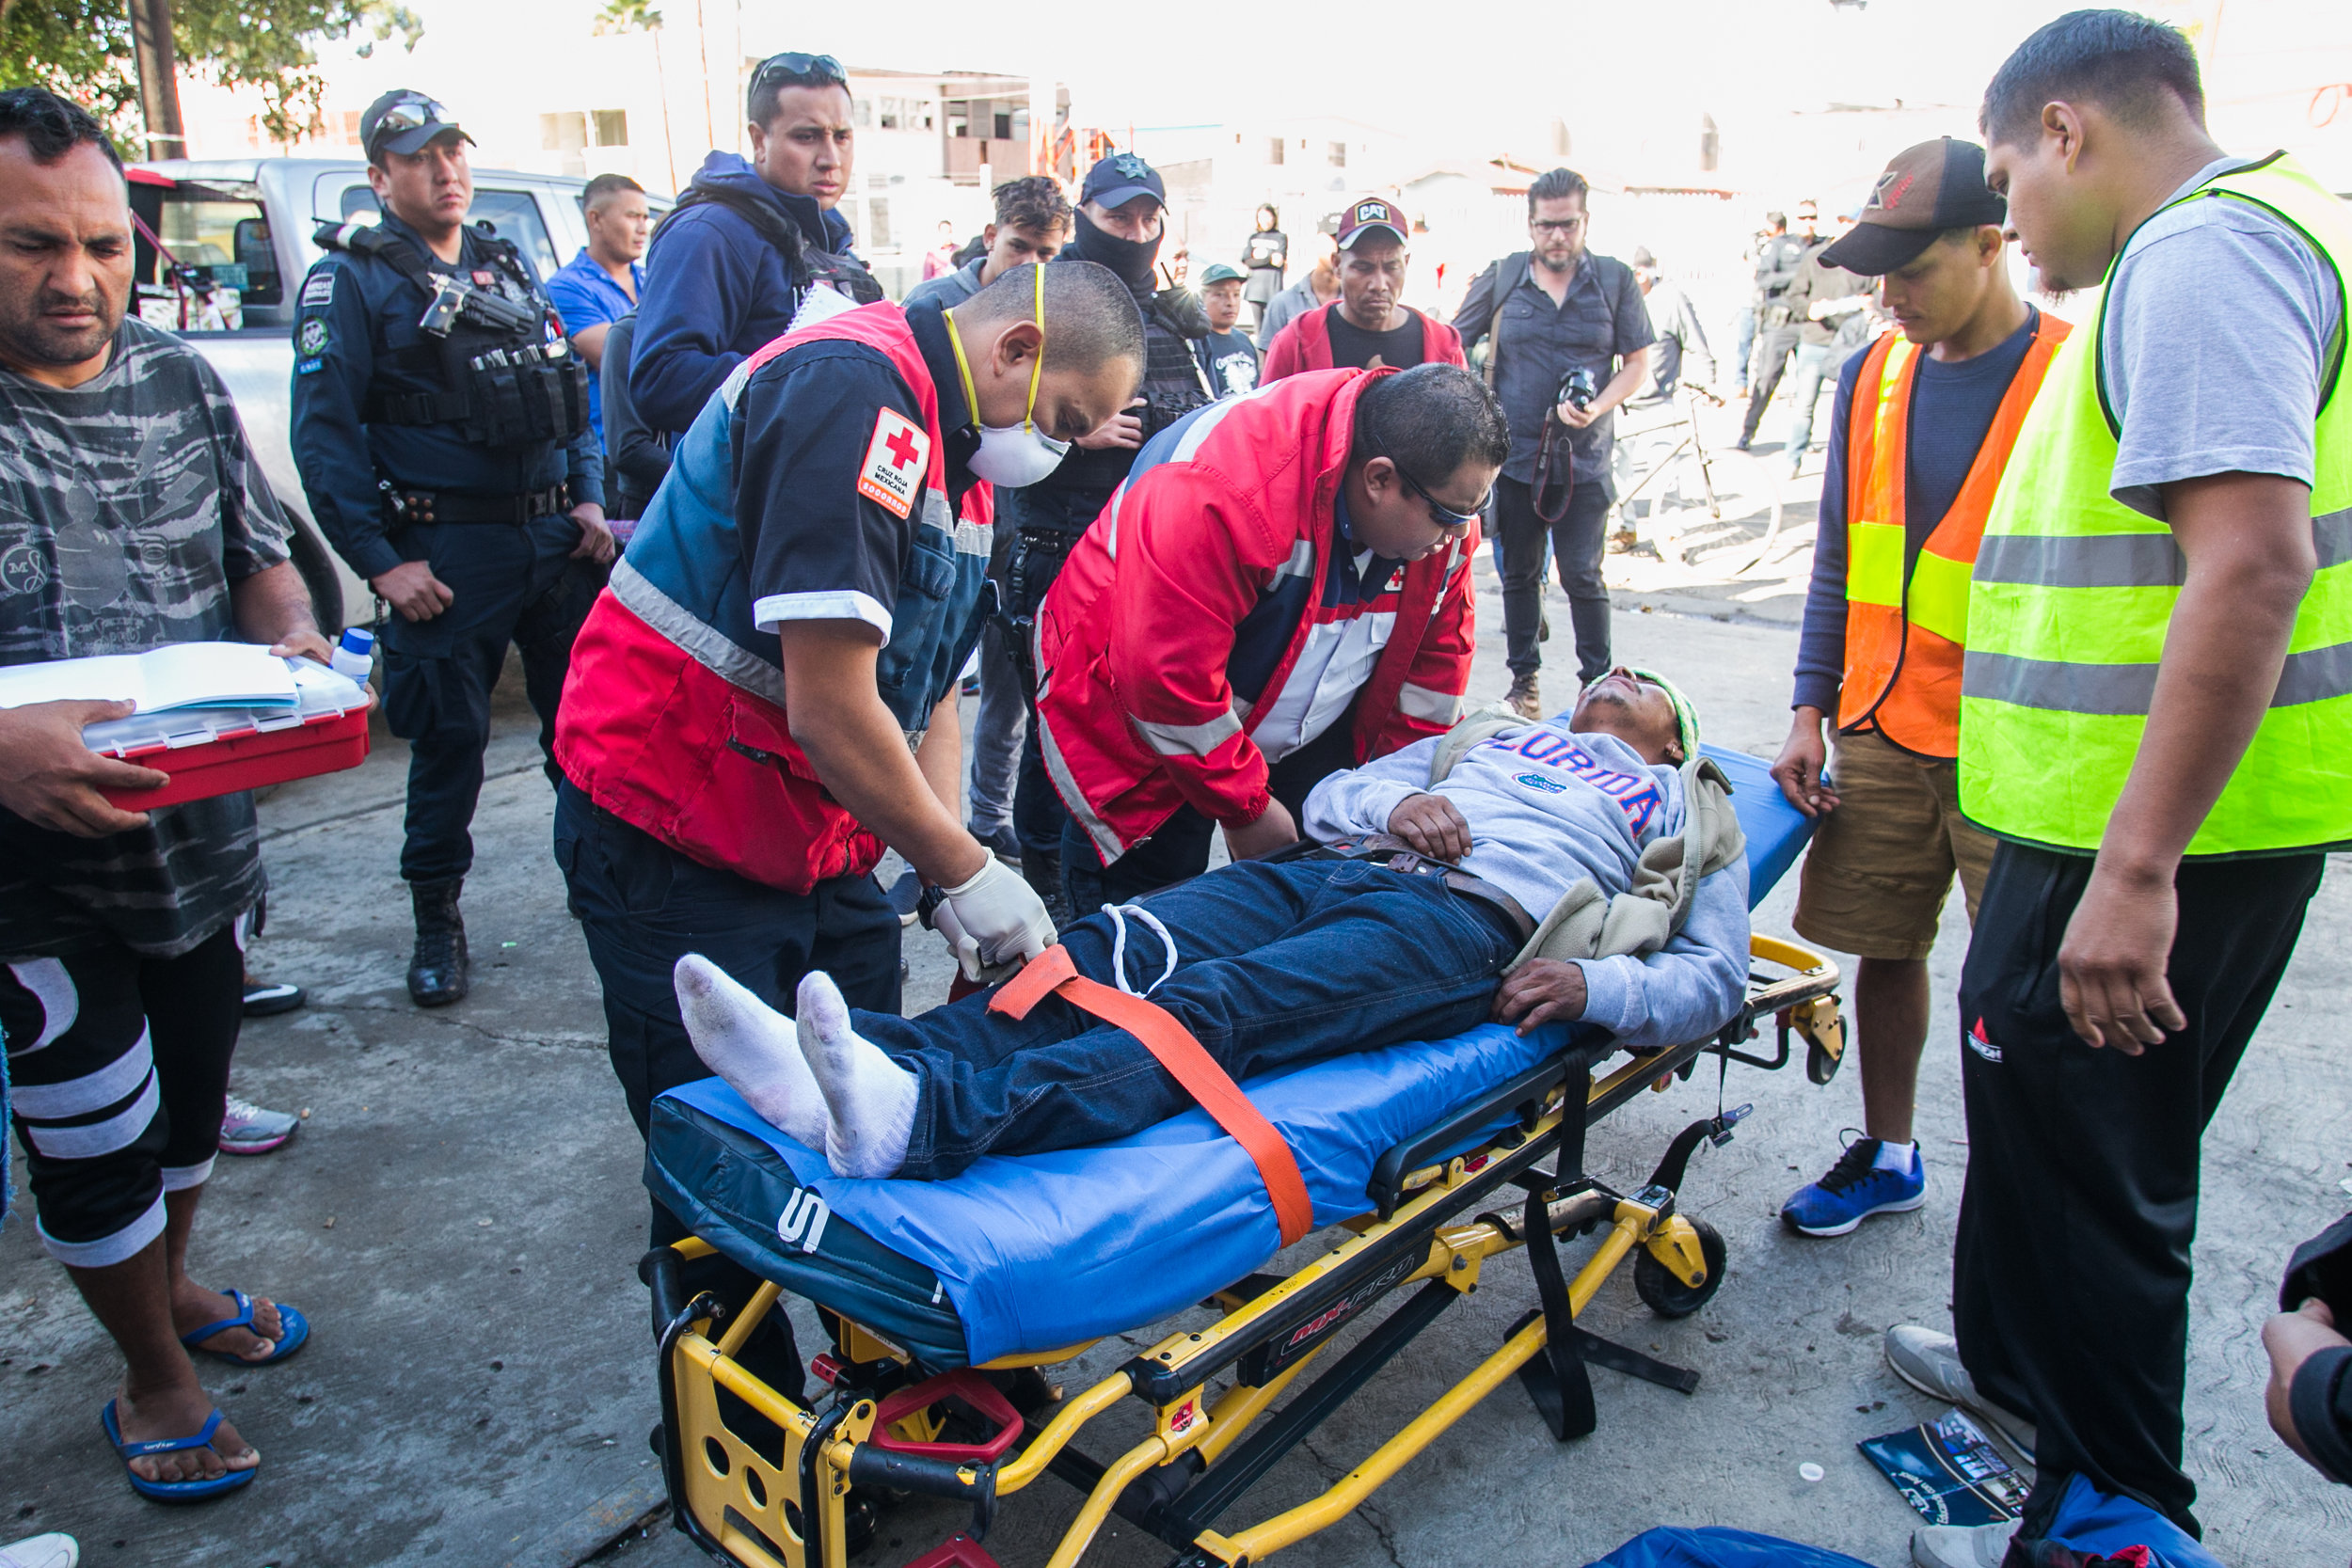  A man receives medical attention from emergency services after waiting for over 25 minutes. He began seizing and vomiting due to a lack of medication according to emergency responders on scene. Medical services were suspended in the facility several